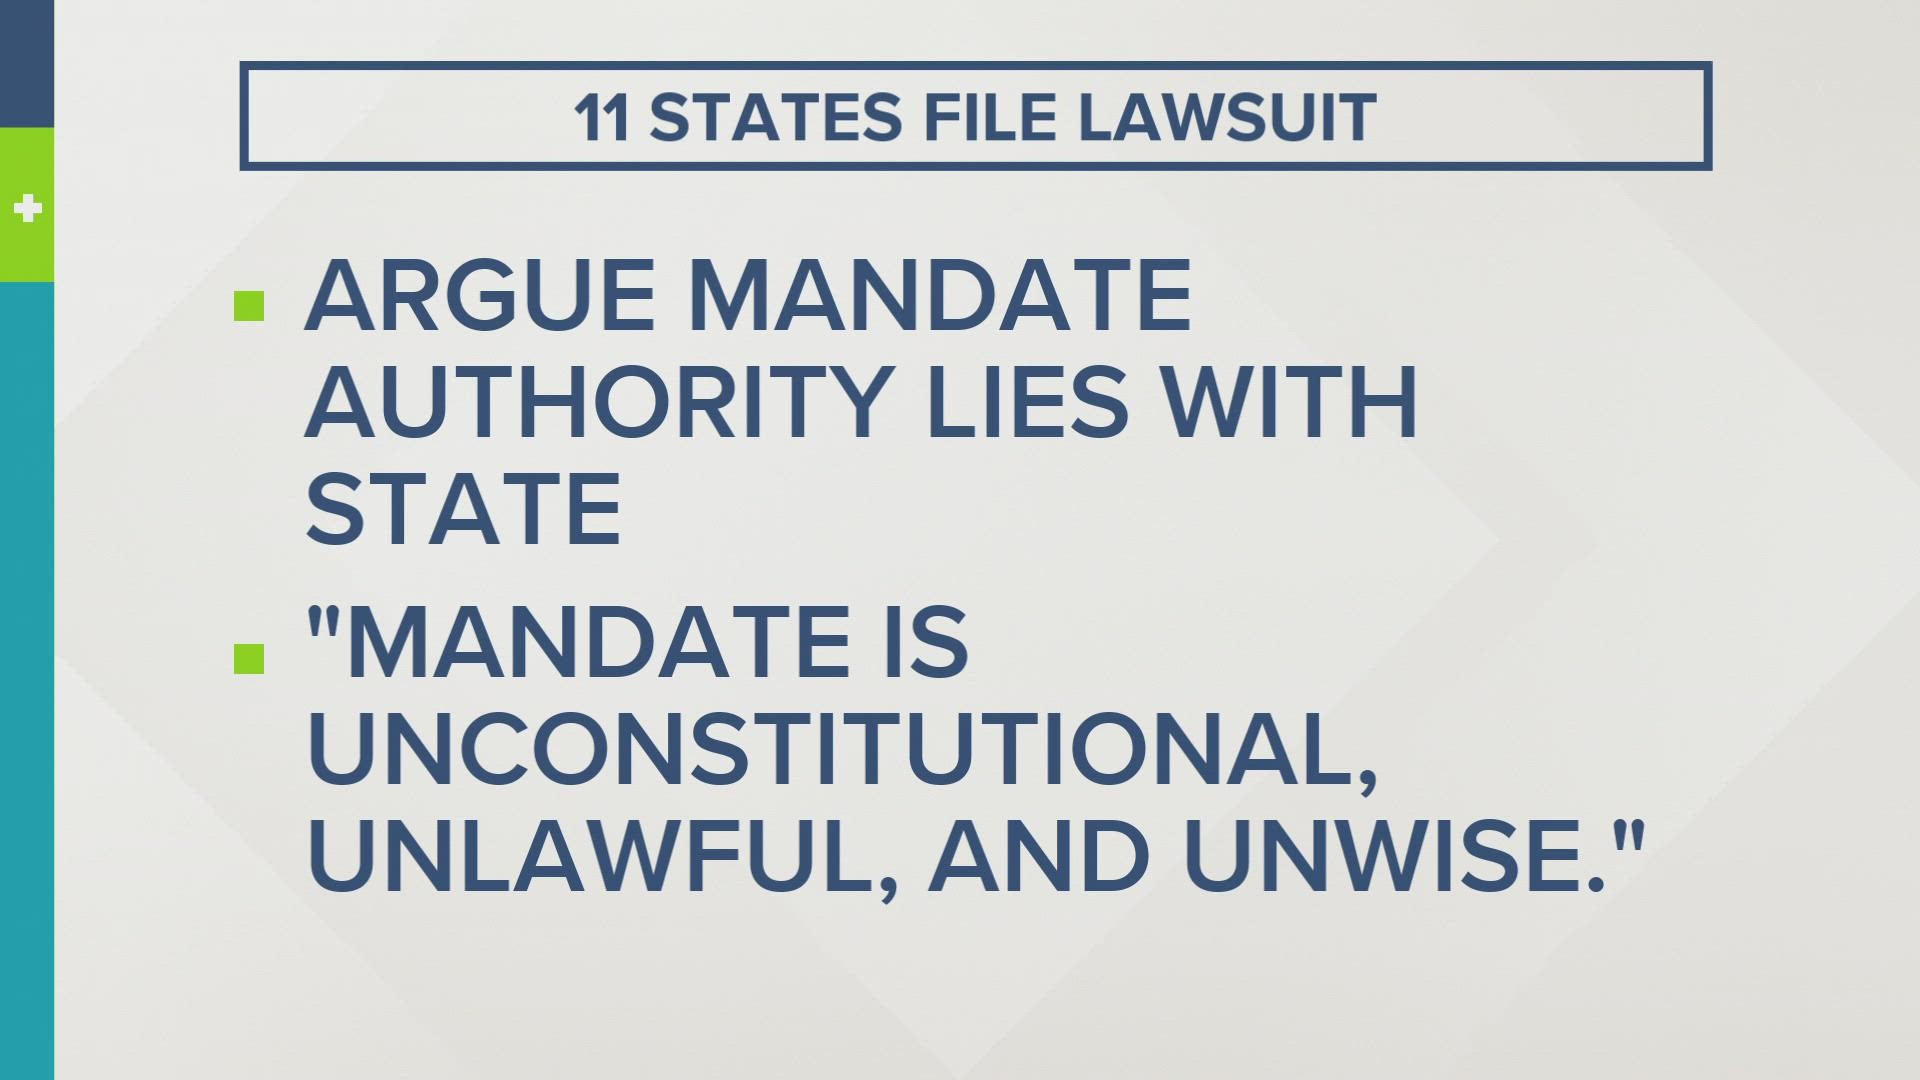 “This mandate is unconstitutional, unlawful, and unwise," the complaint states.